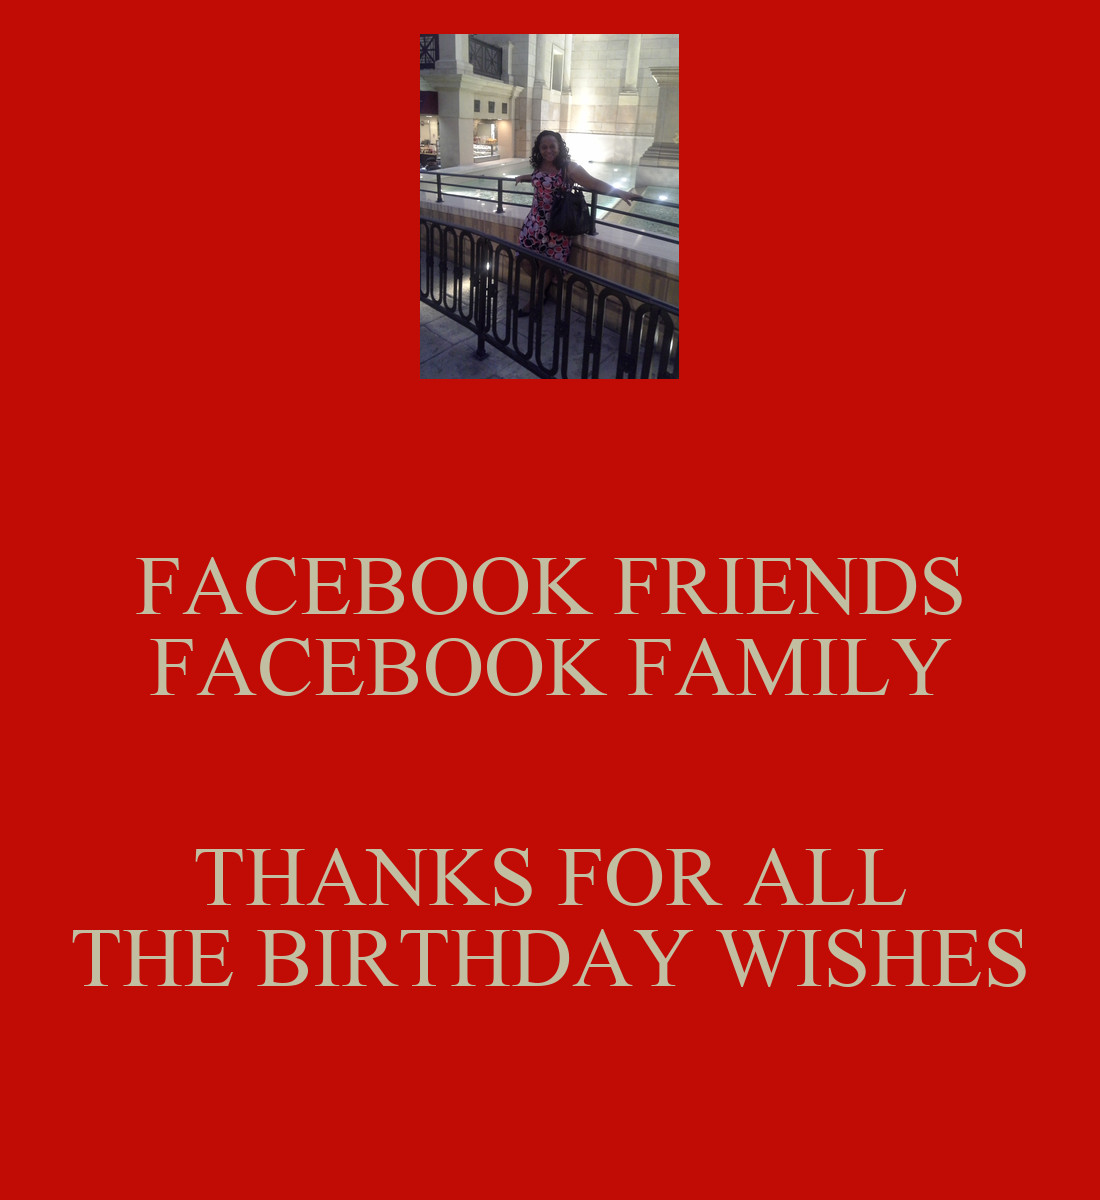 Thanks For The Birthday Wishes Facebook
 FACEBOOK FRIENDS FACEBOOK FAMILY THANKS FOR ALL THE